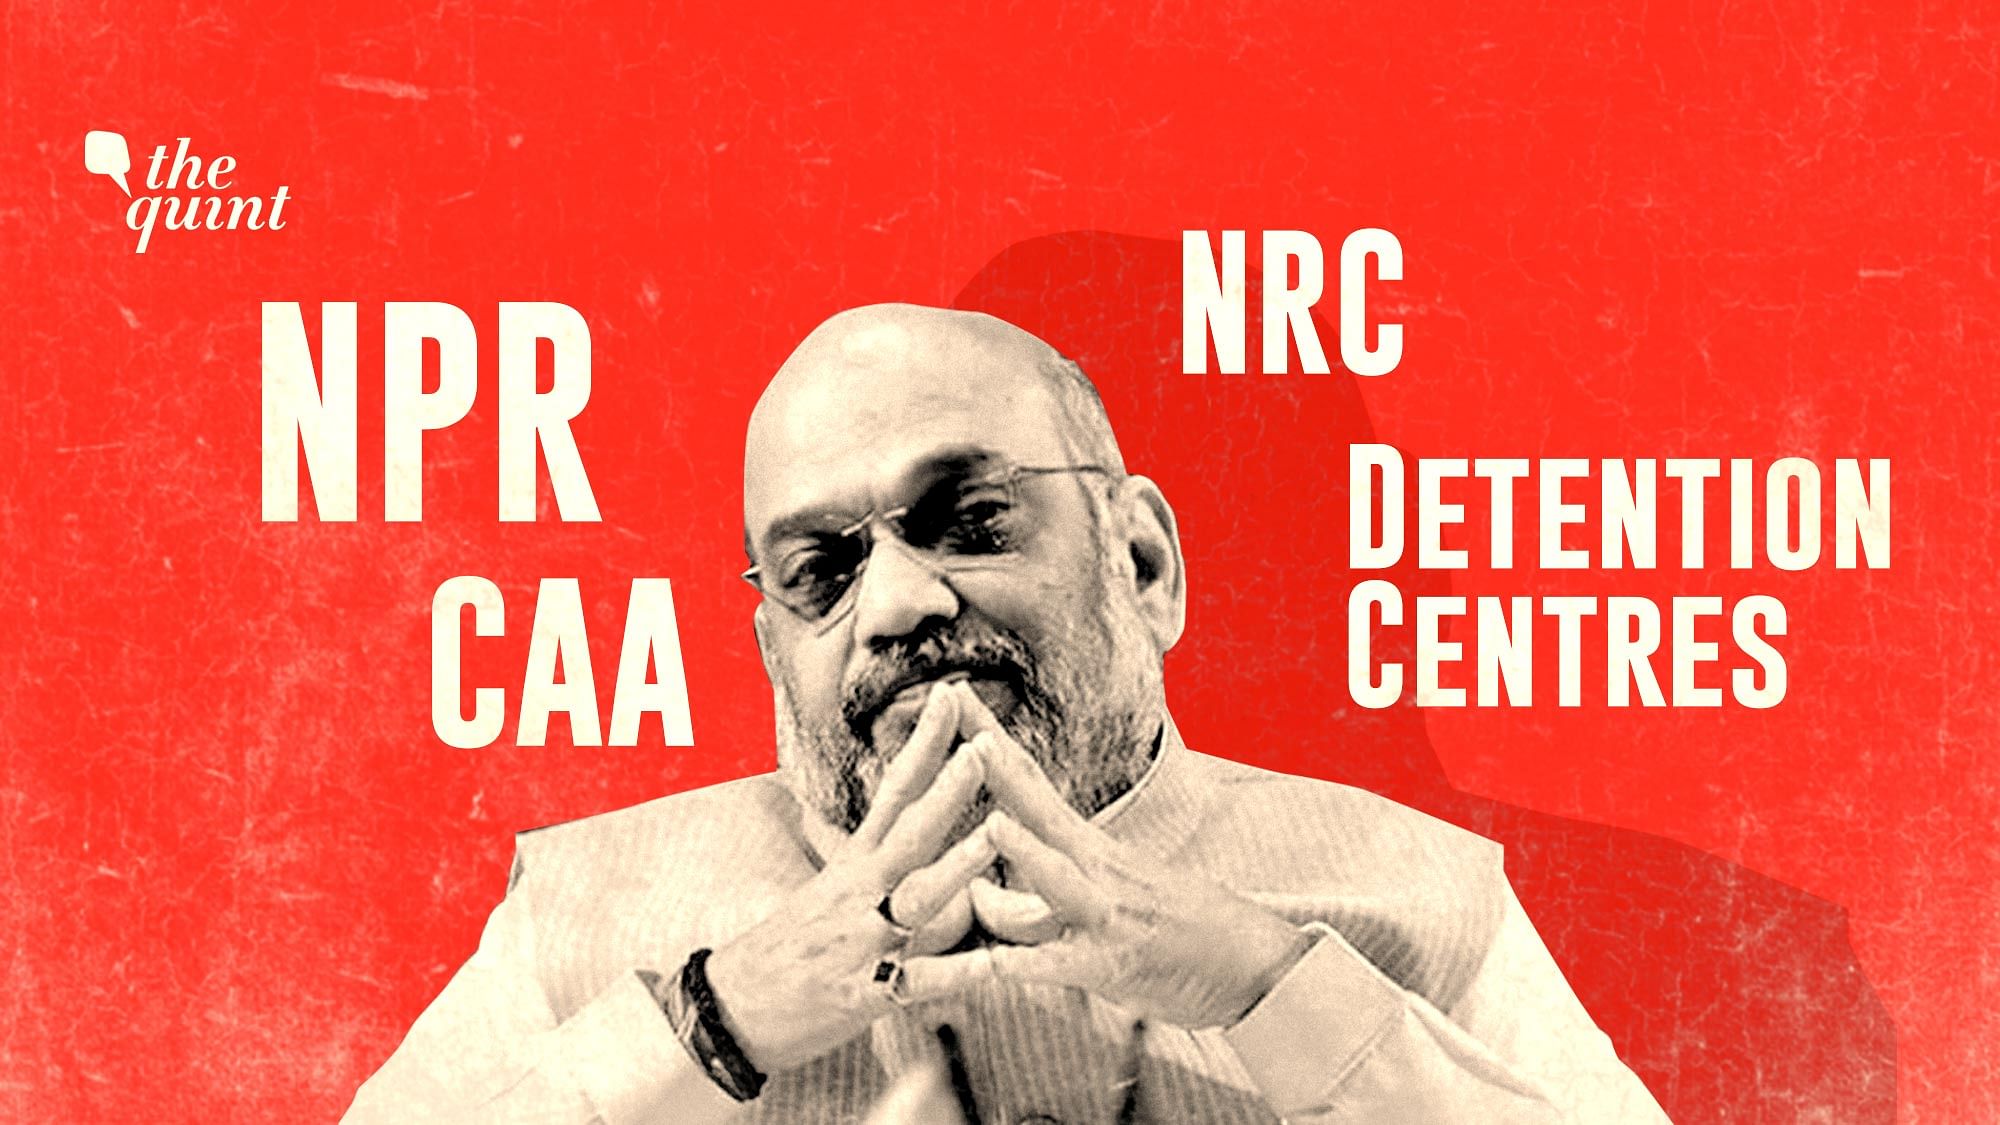 NRC: Do you know how many detention centres there are in India? 